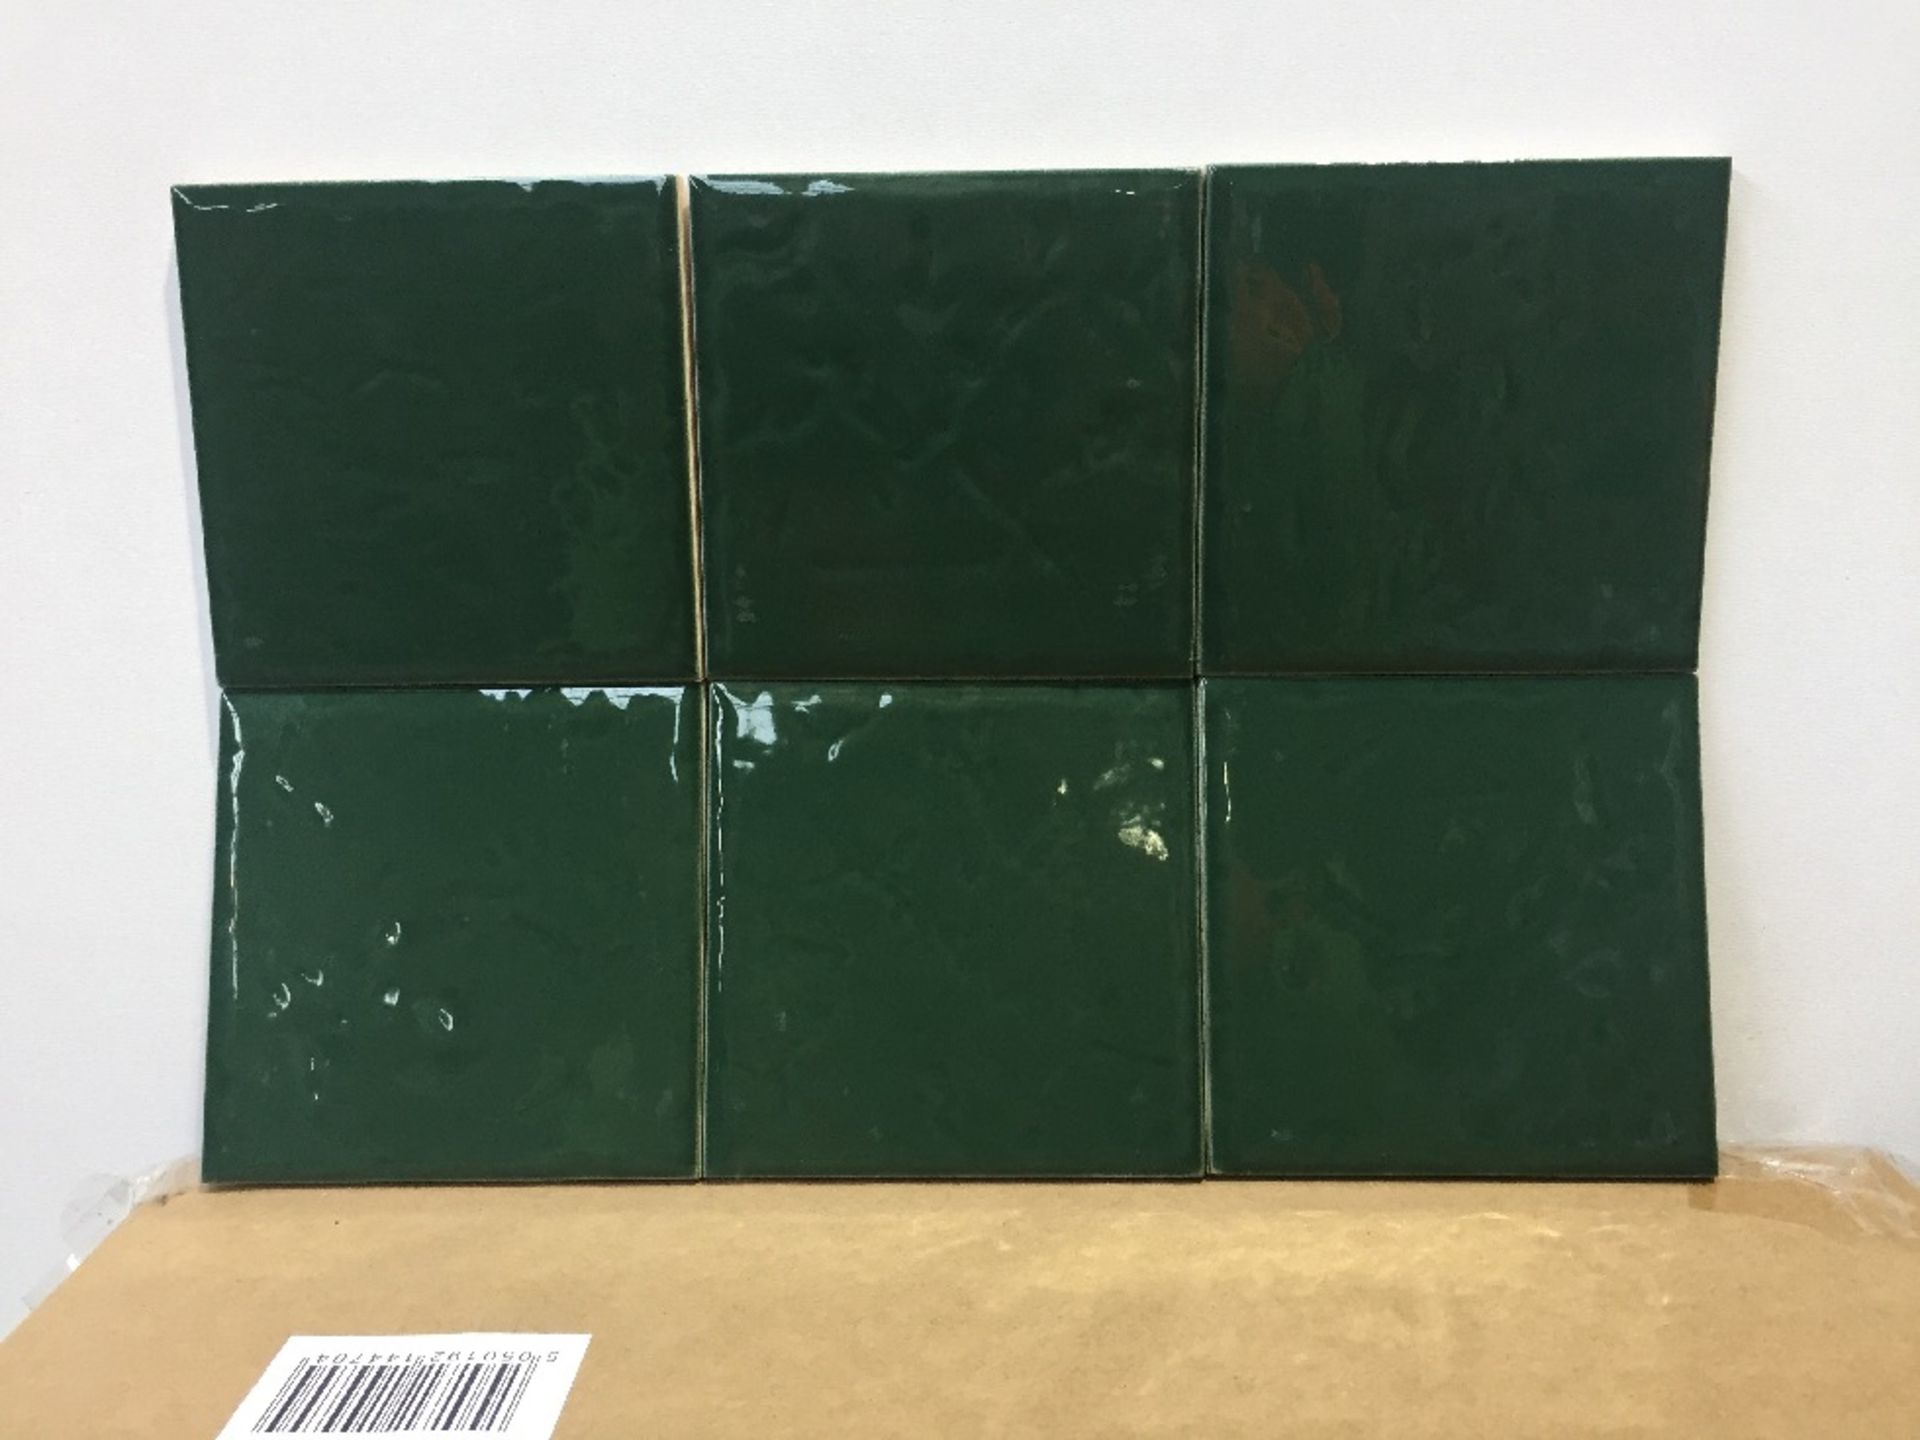 4 BRAND NEW BOXES OF JOHNSONS BATHROOM TILES IN COTSWOLD BOTTLE GREEN, 25 TILES TO A BOX, 10CM X